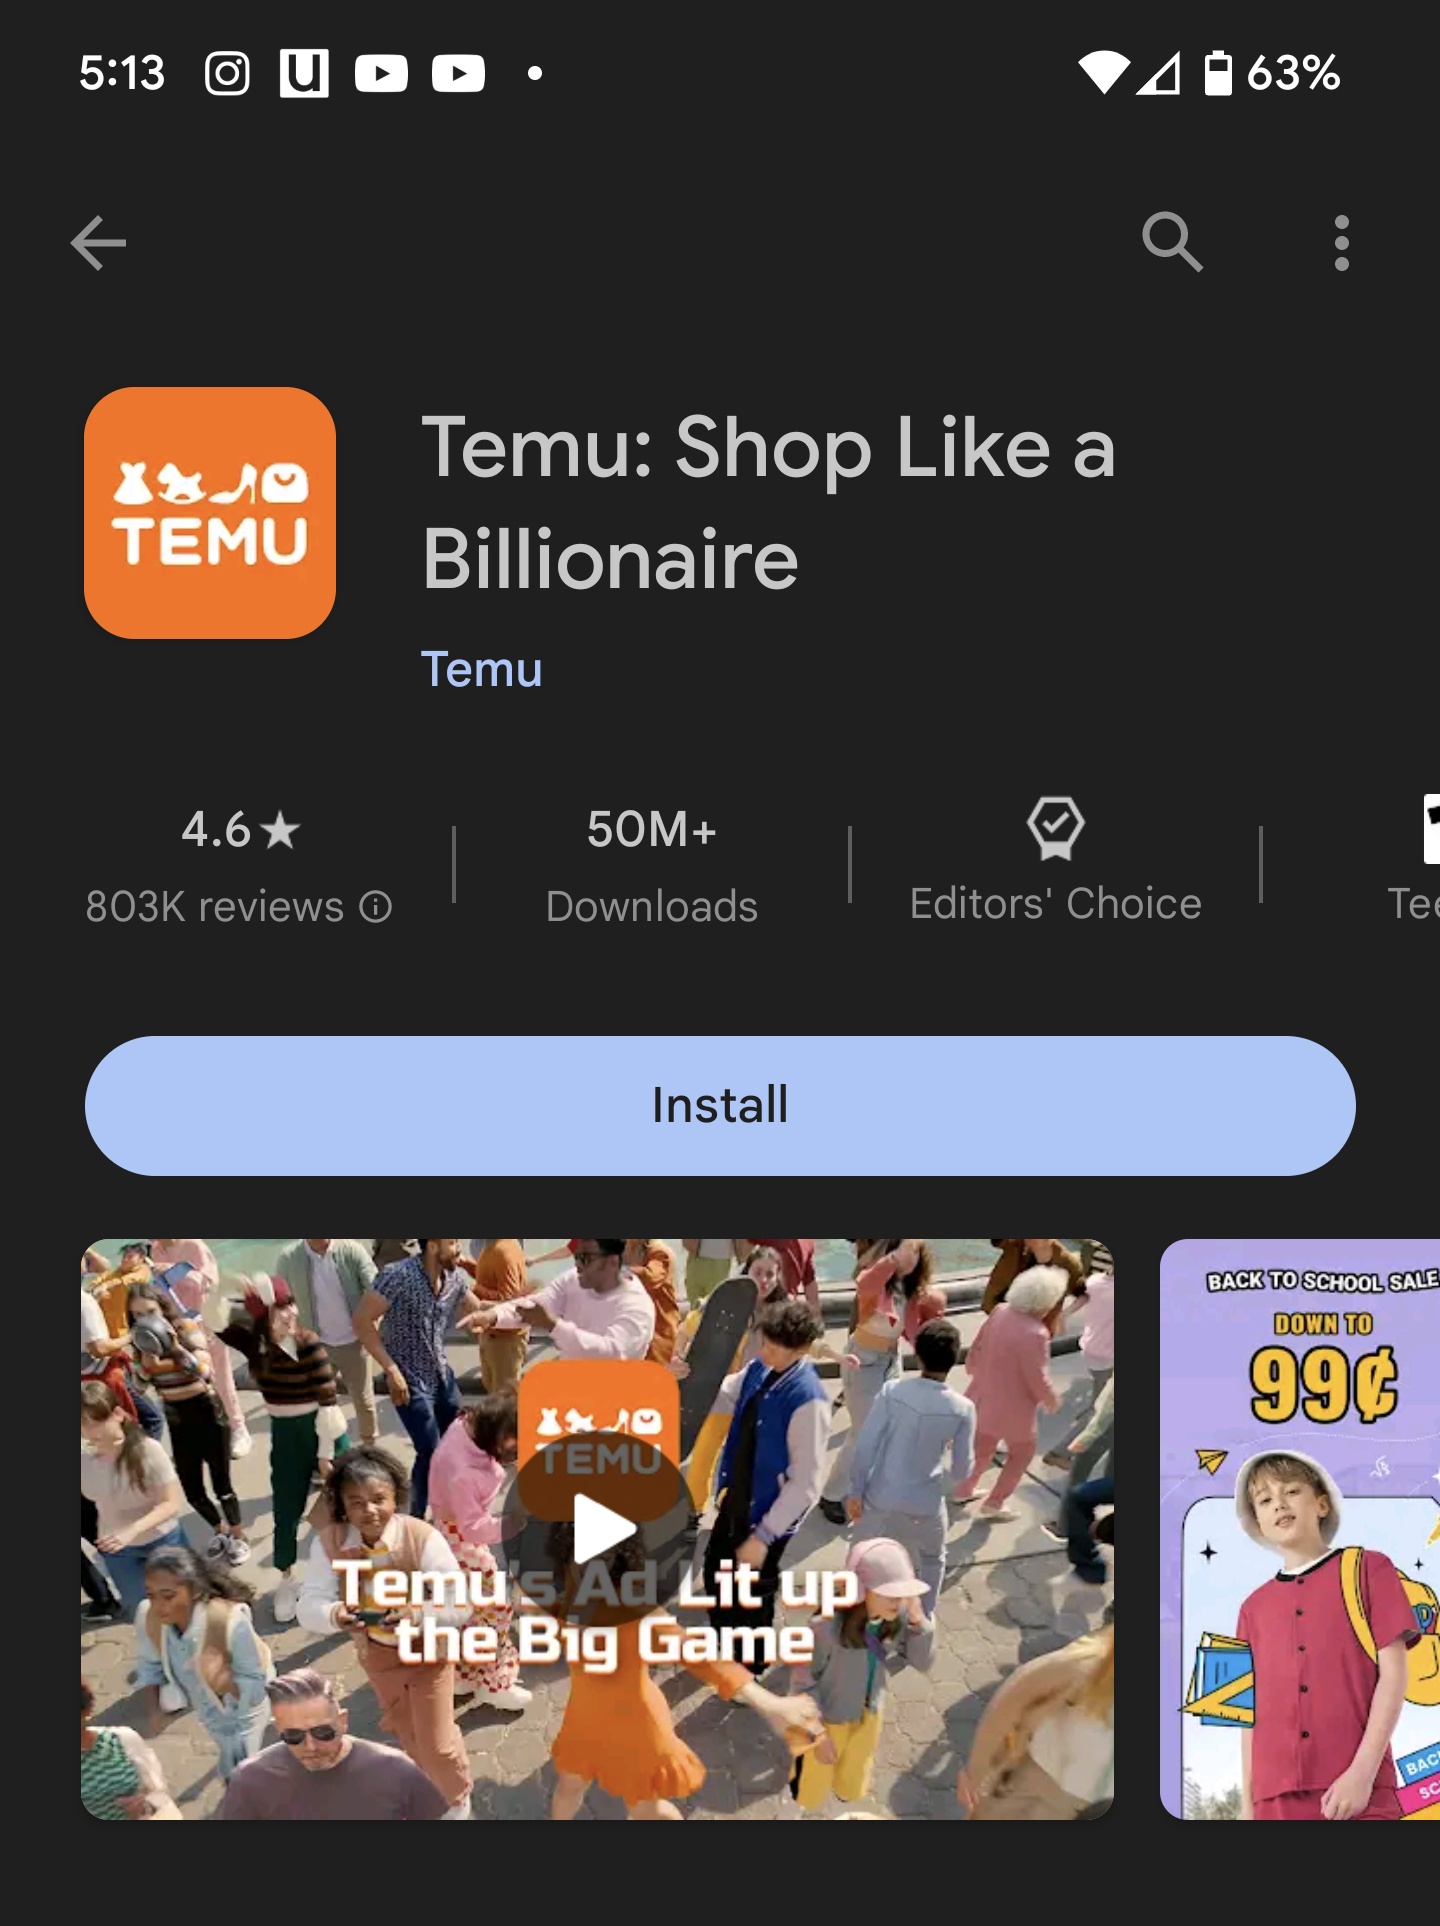 Is the Temu app safe to shop on?